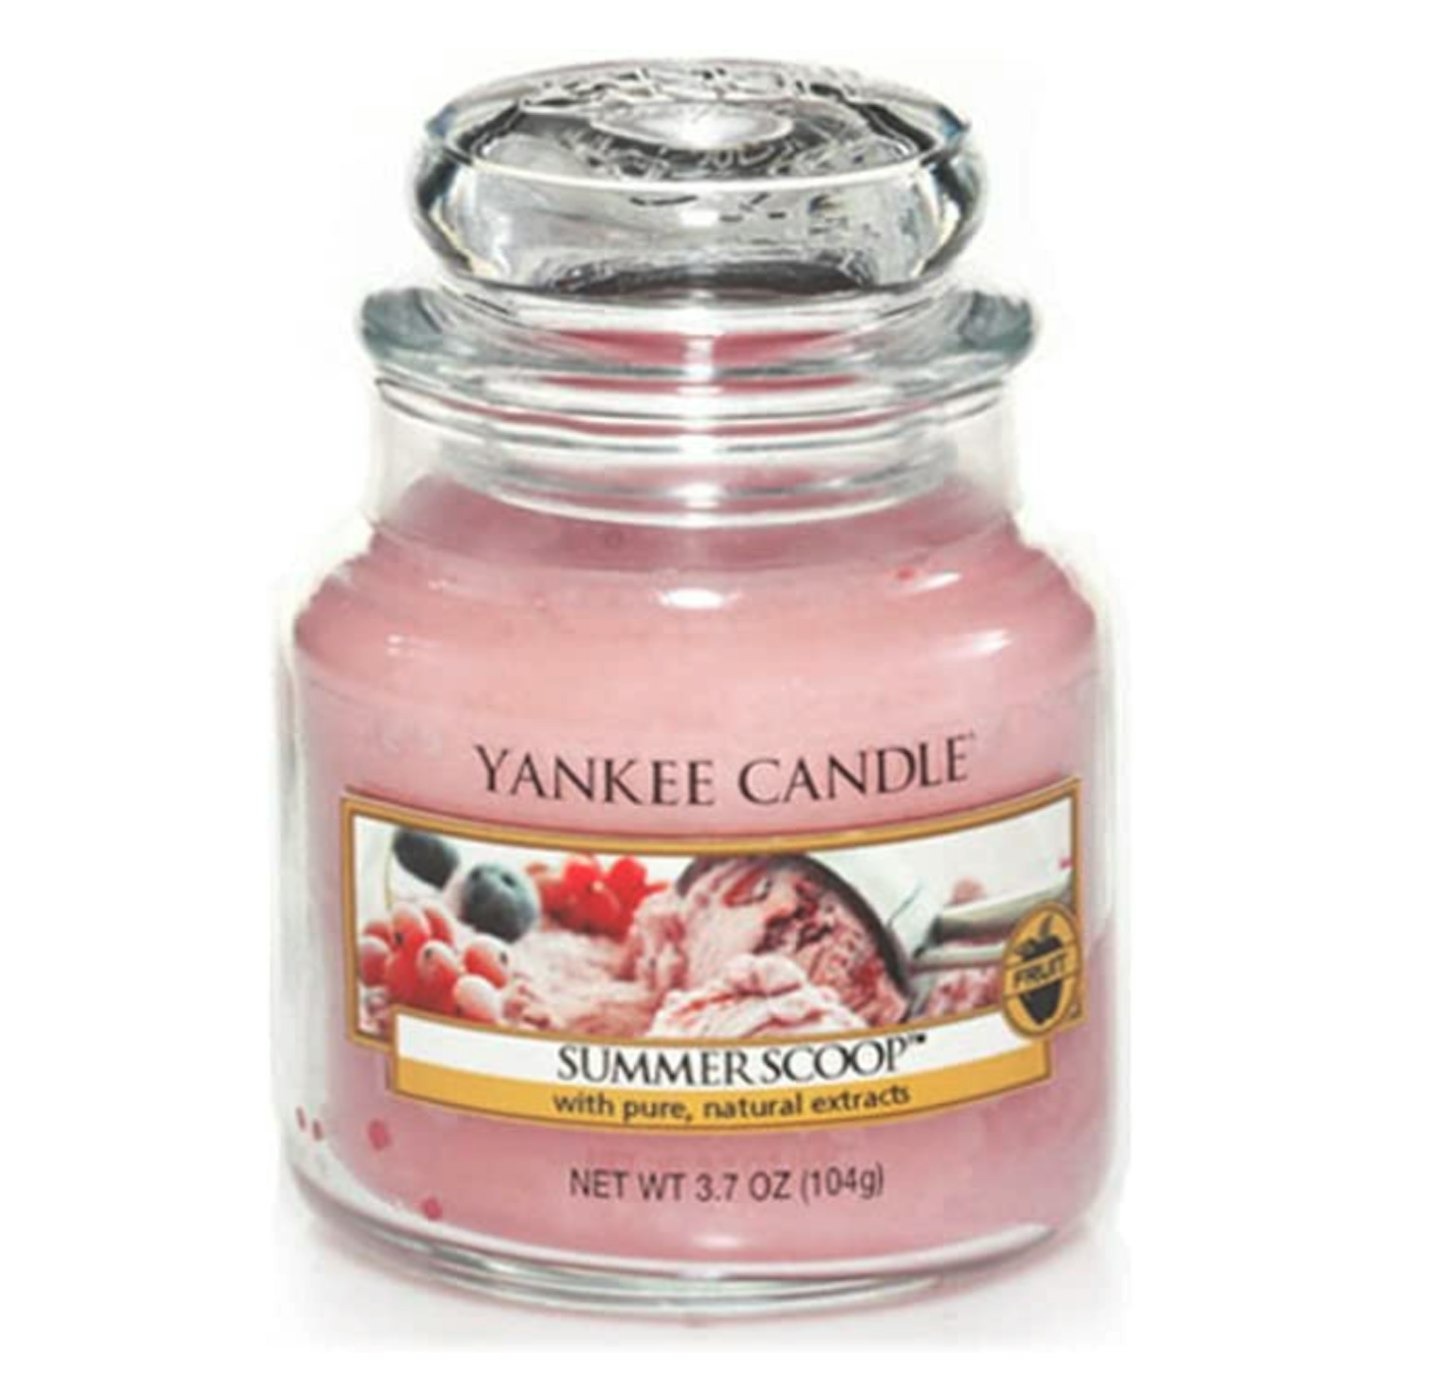 Yankee Candle Small Jar Candle, Summer Scoop